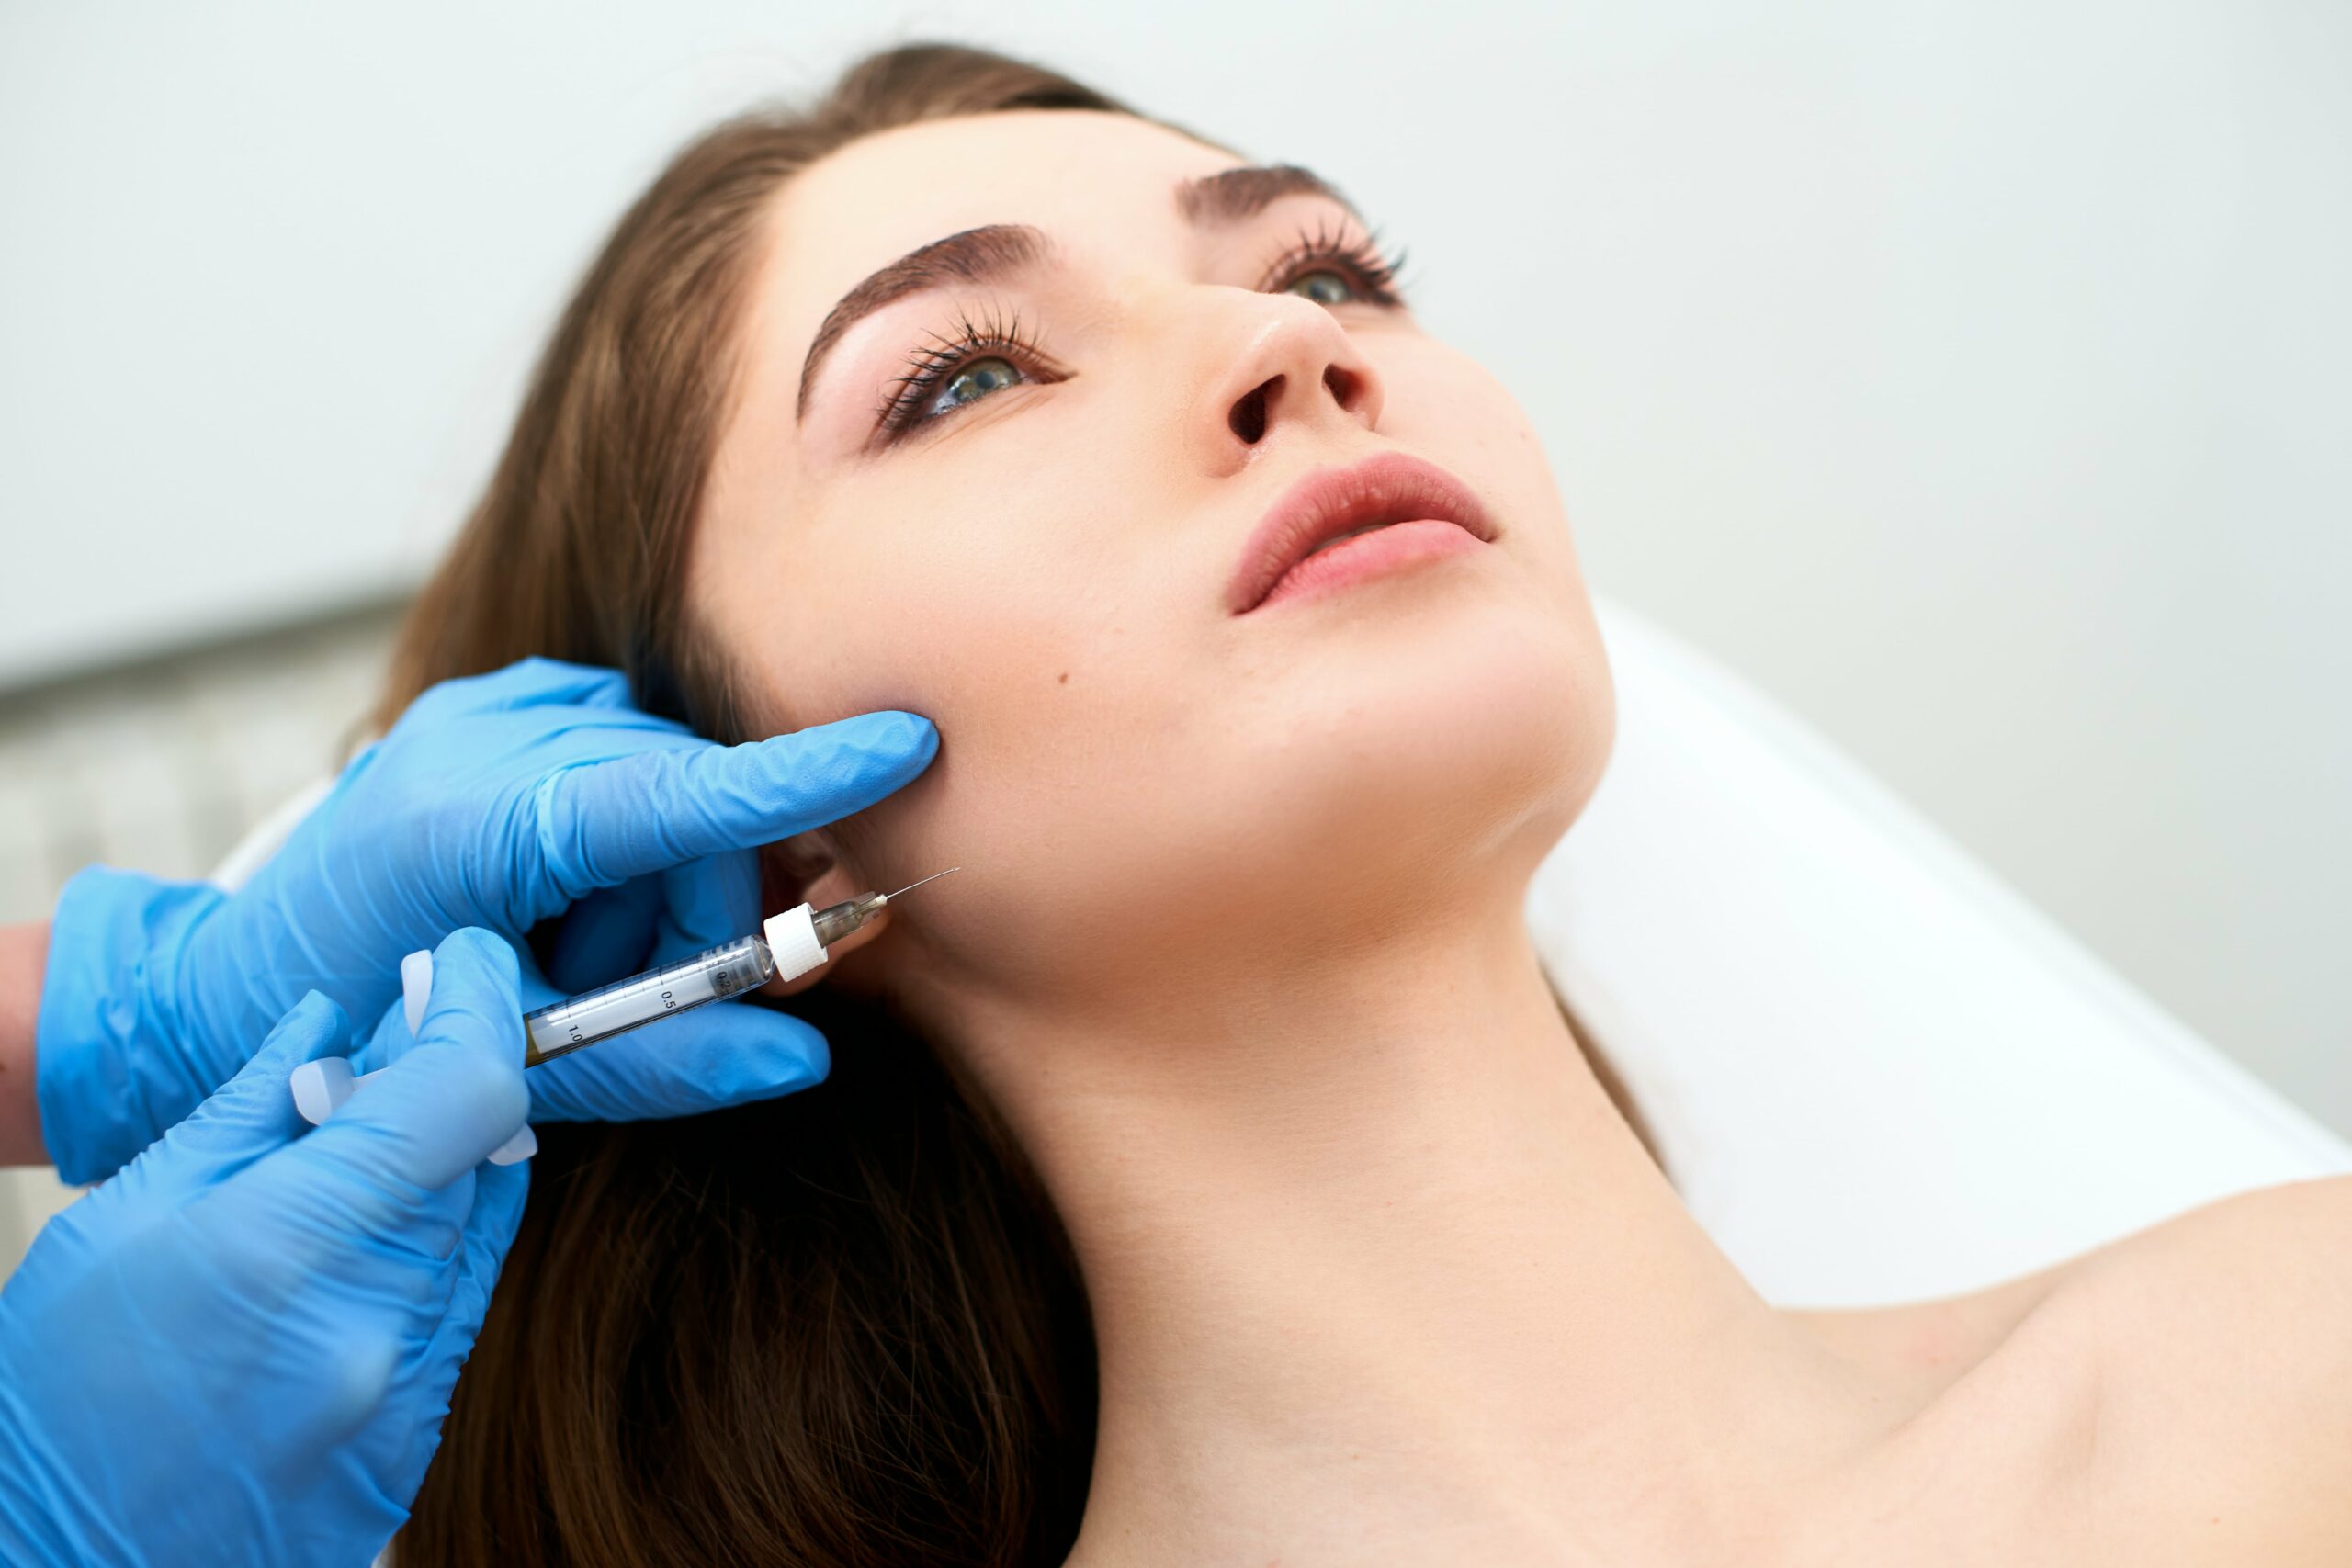 What is Sculptra, and how does it work to enhance facial volume and appearance